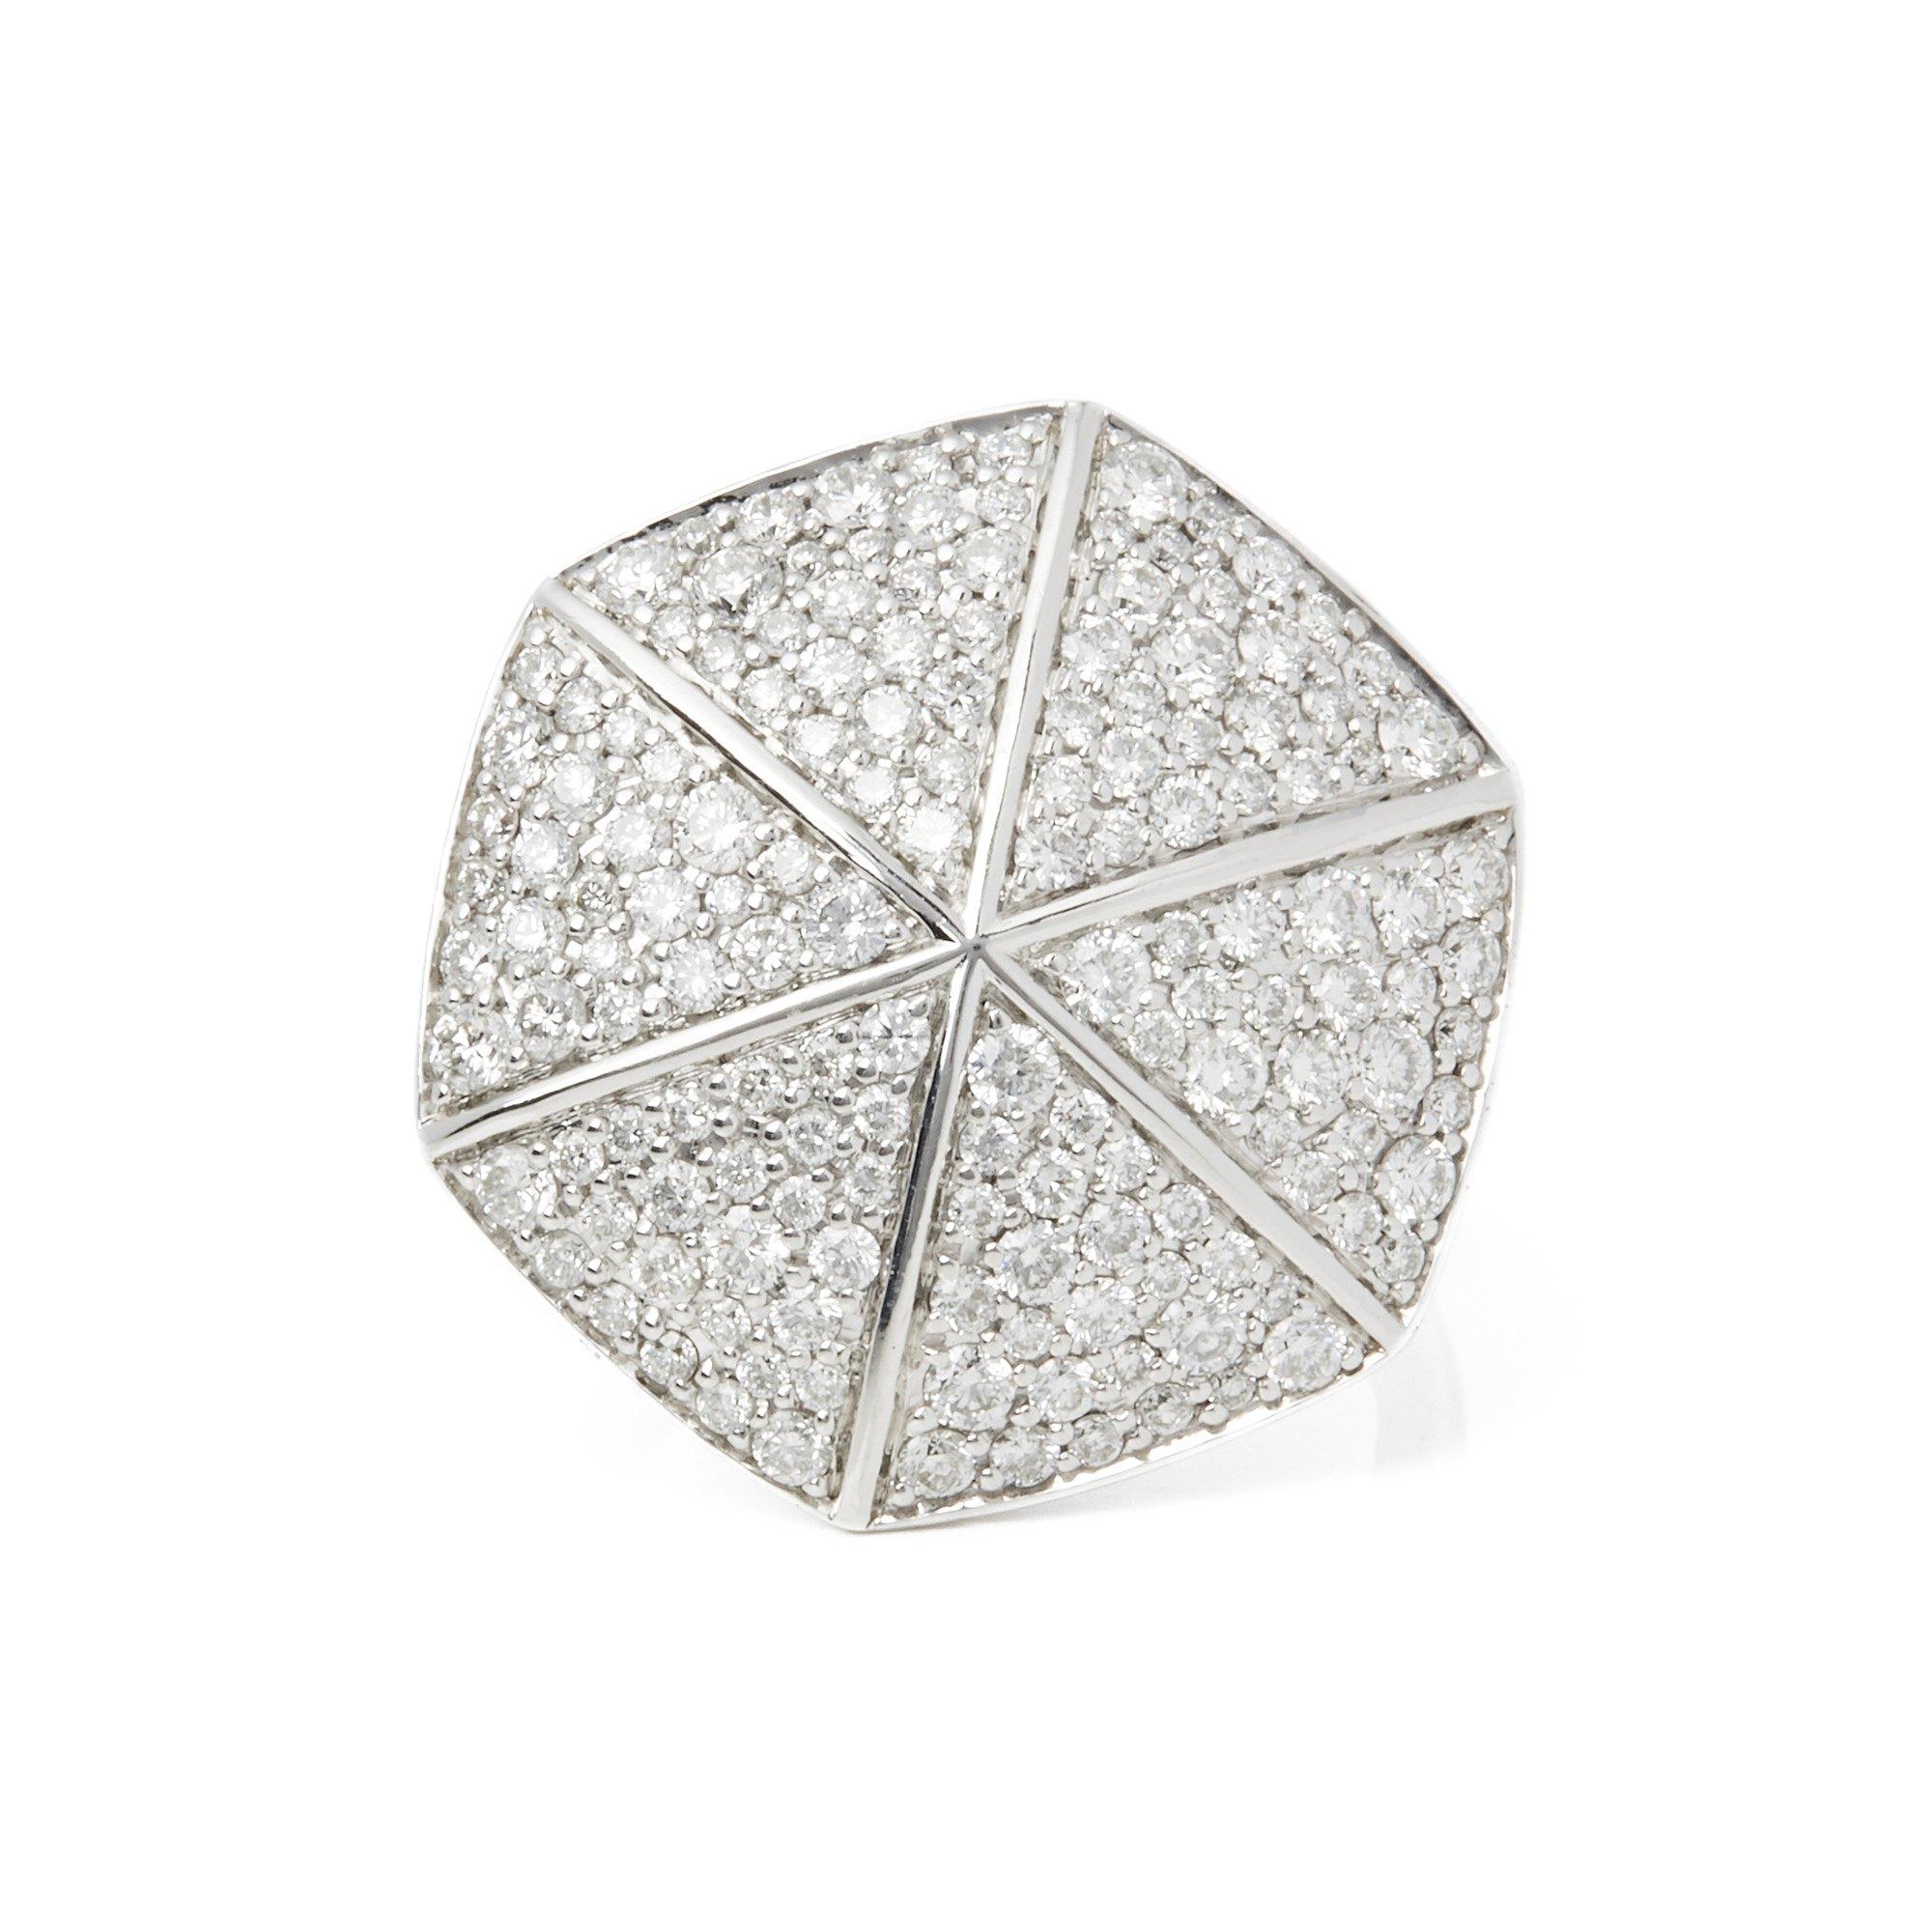 This Ring by Stephen Webster is from his Deco Collection and features Six Pave Round Briliant Diamond set sections with a total of One Hundred and Sixteen stones forming a Hexagonal shape. Set in 18k White Gold with Signature Stephen Webster